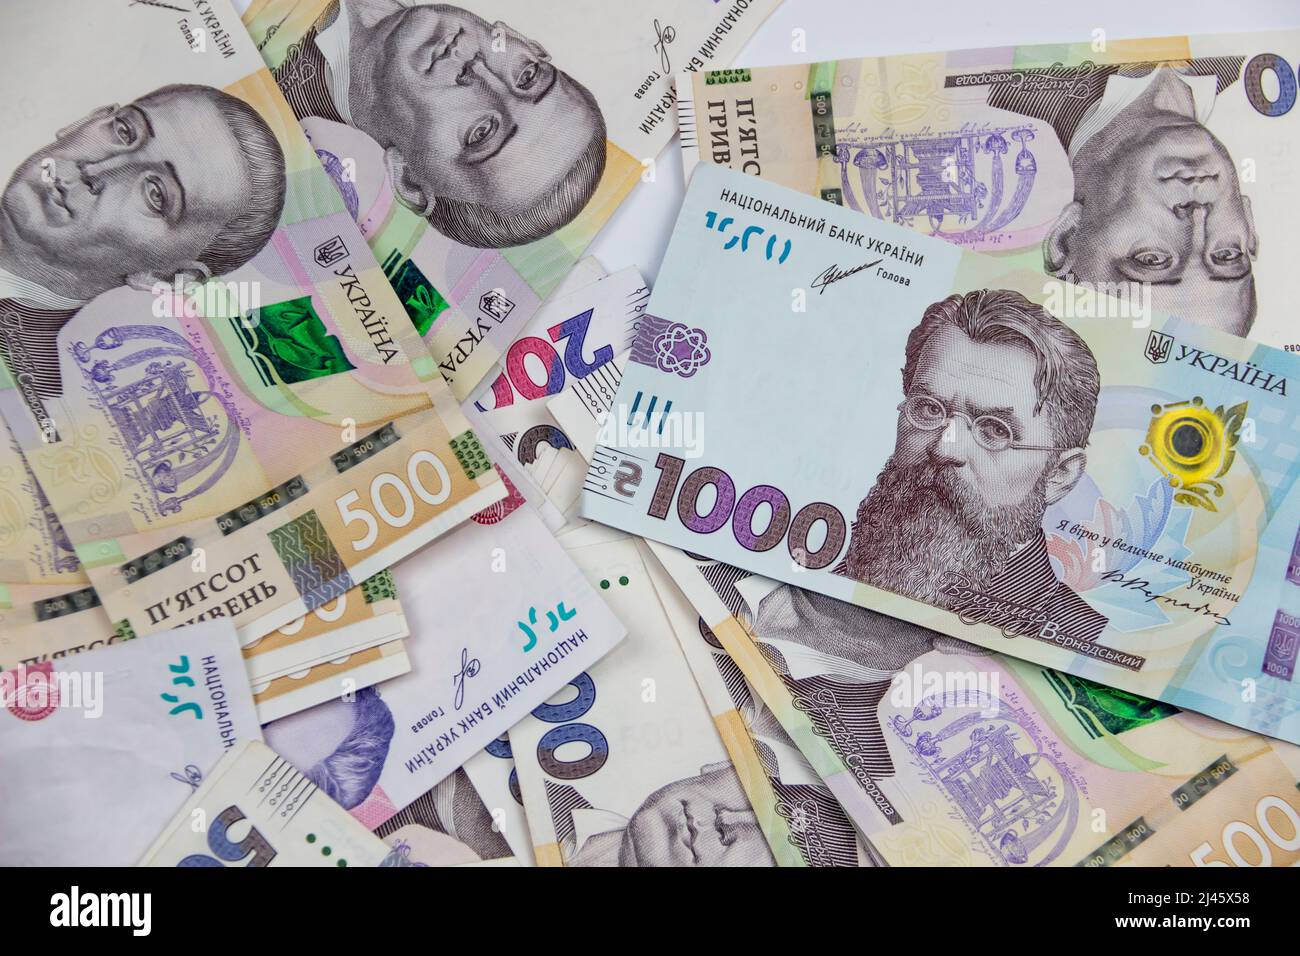 Ukrainian money currency of different denominations scattered. Hryvnia banknotes 200, 500 and 1000 on background. Money of Ukraine. Stock Photo